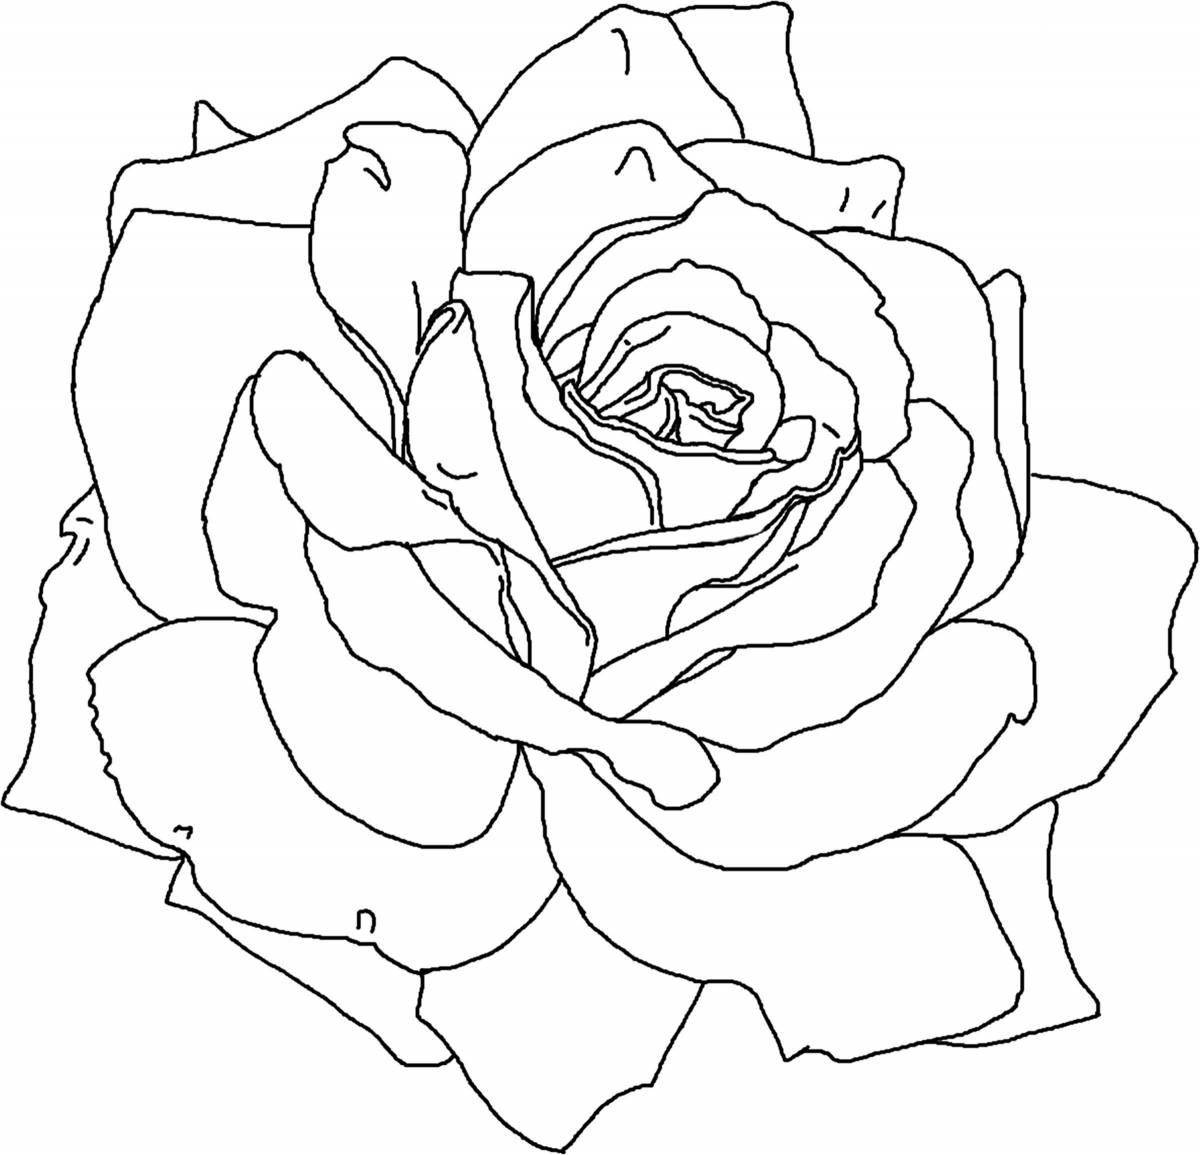 Adorable rose coloring book for girls